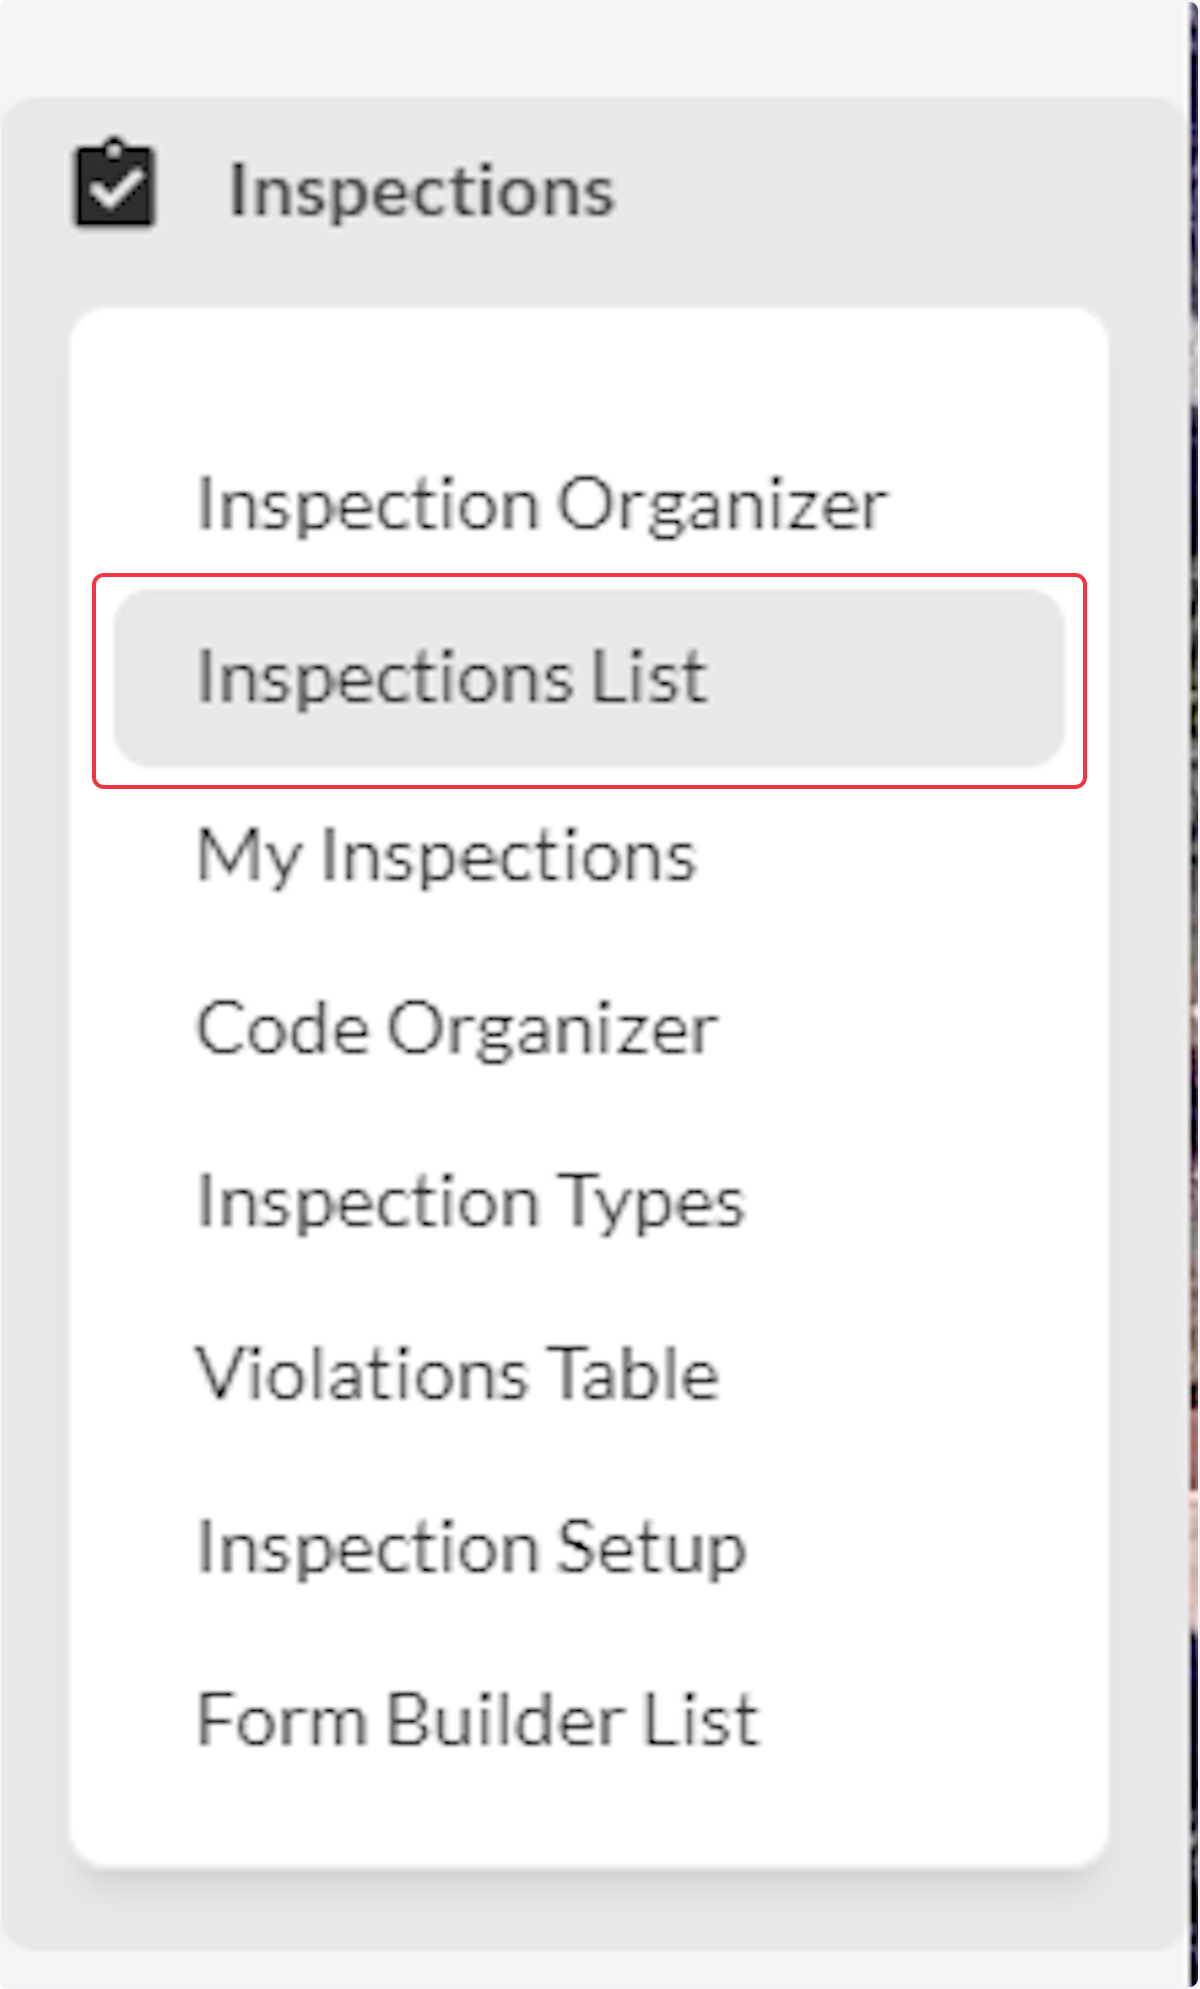 Click on Inspections List.